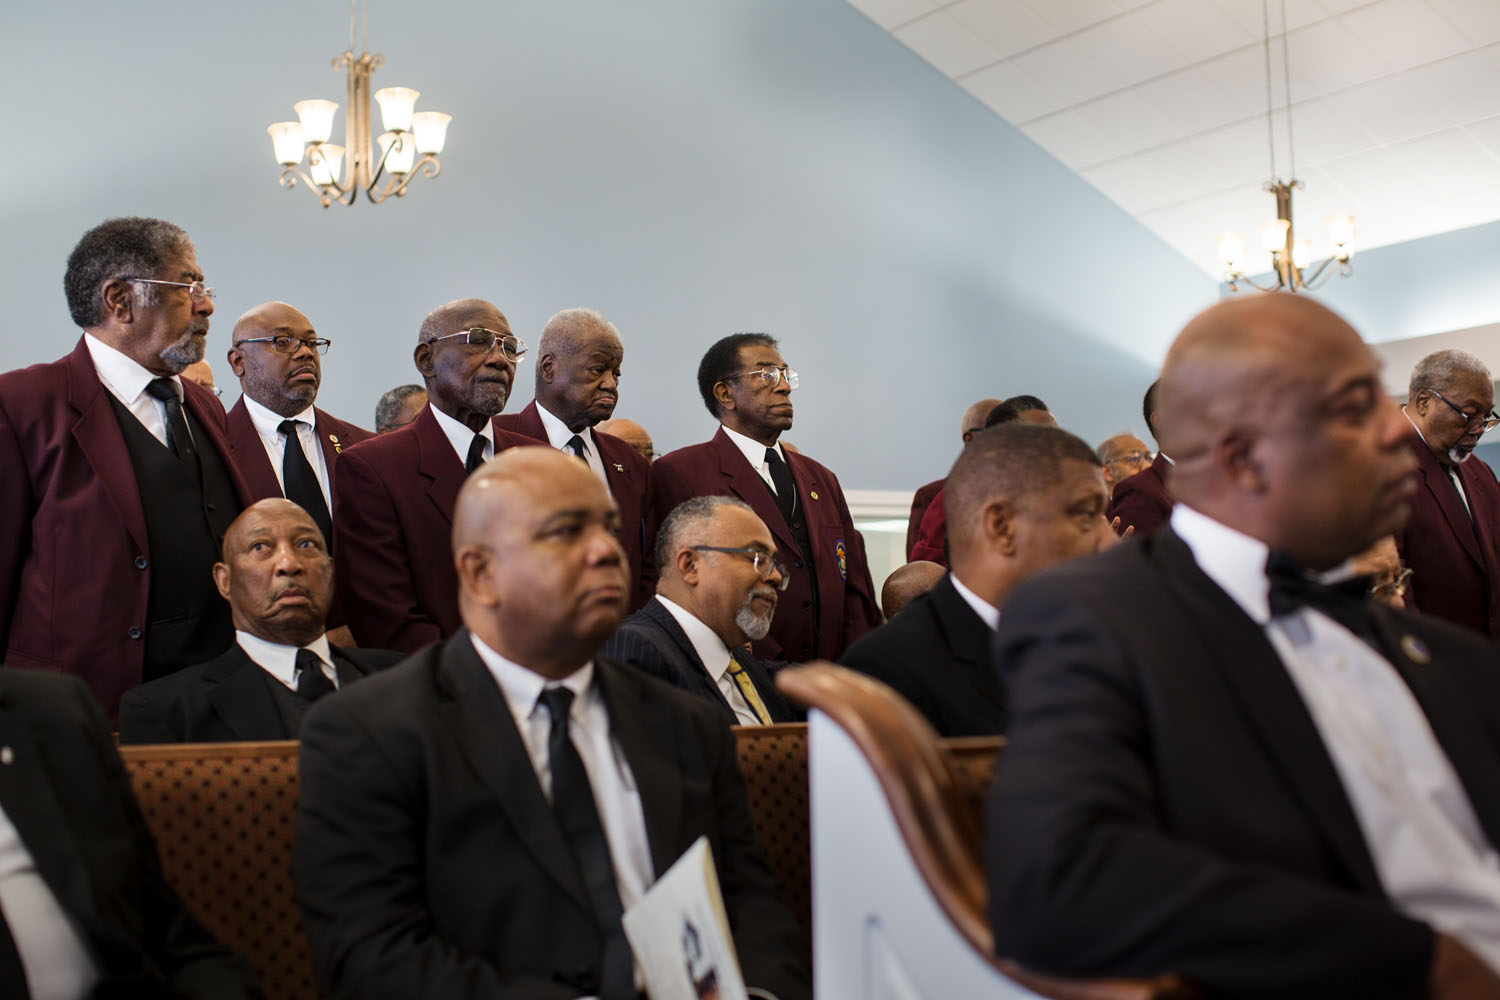 Homegoing service for Earl Haddon Gray, the last member of the East End Cemetery Burial Association. Scott’s Funeral Home, Richmond, VA, June 2017.